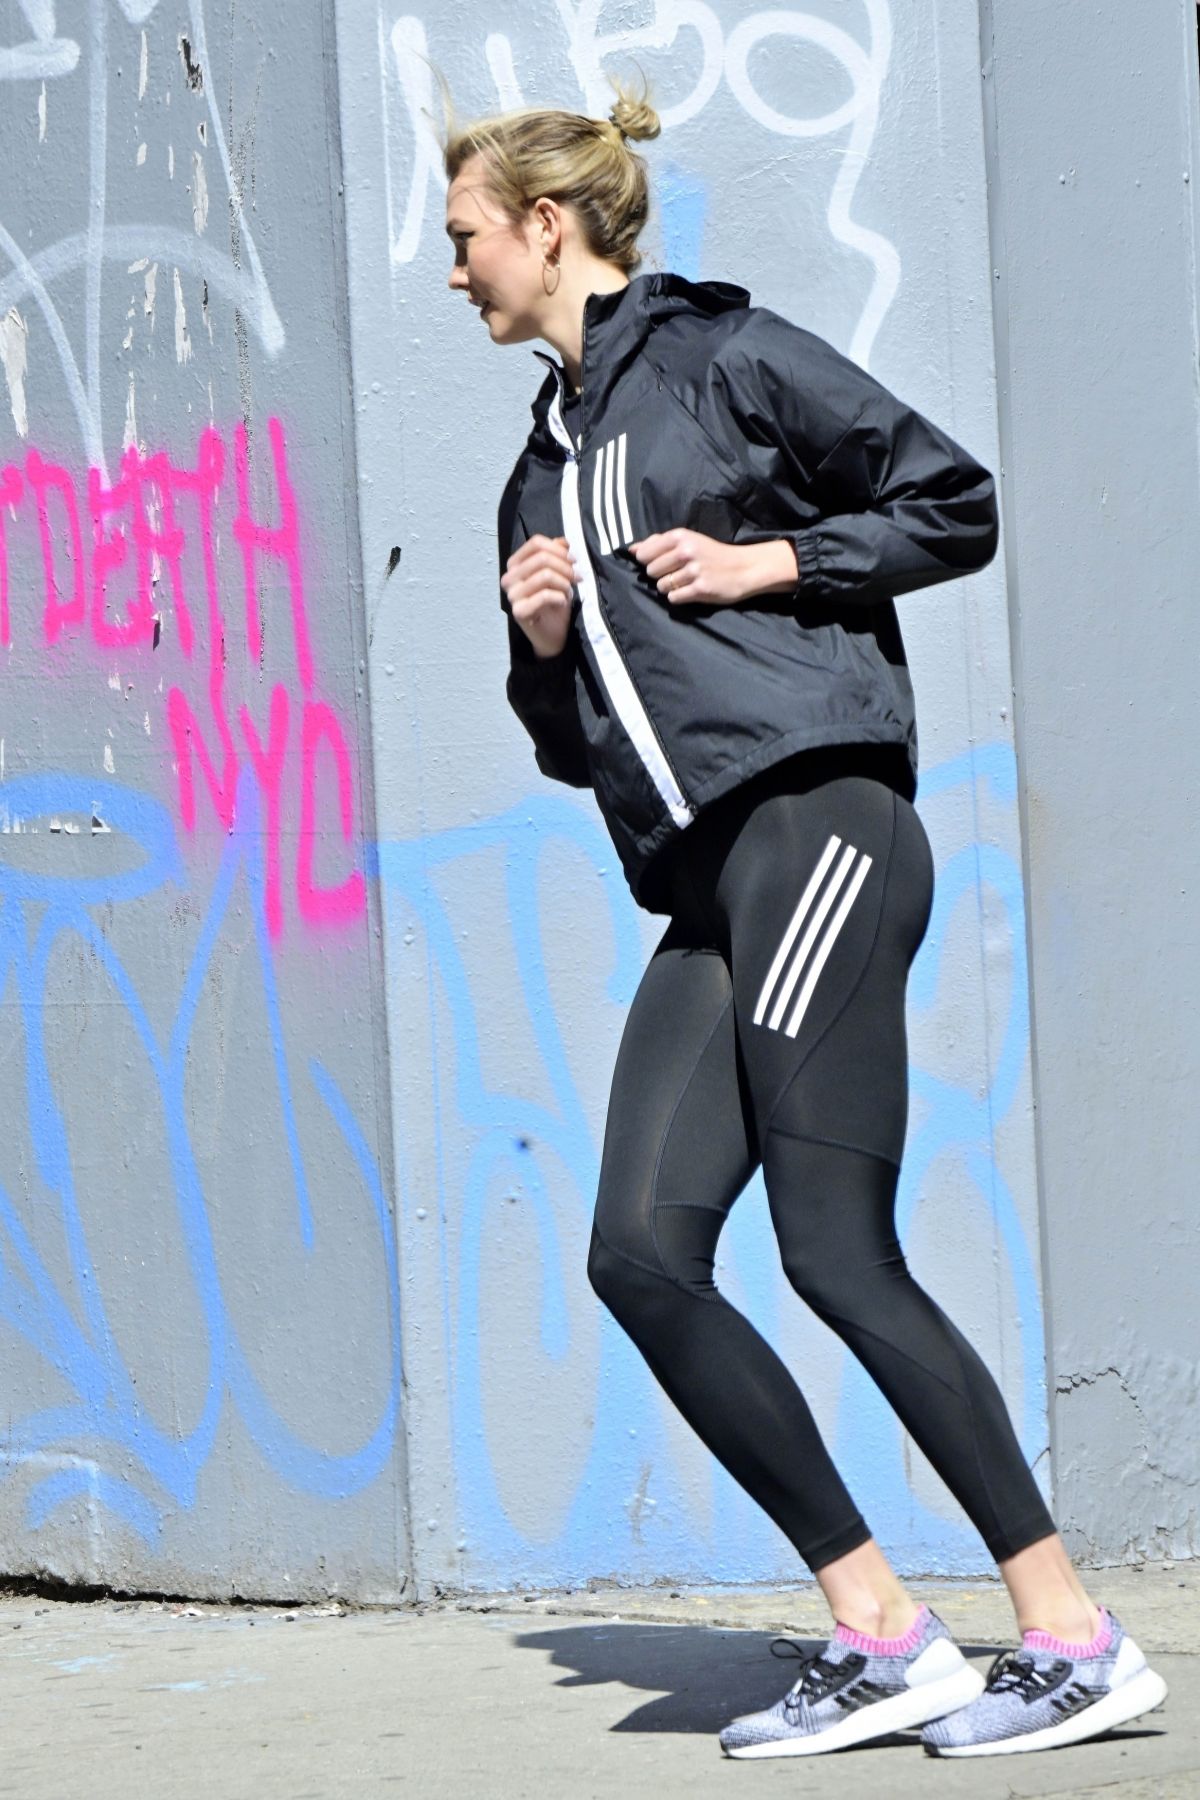 karlie-kloss-on-the-set-of-a-adidas-photoshoot-in-new-york-04-03-2019-8.jpg